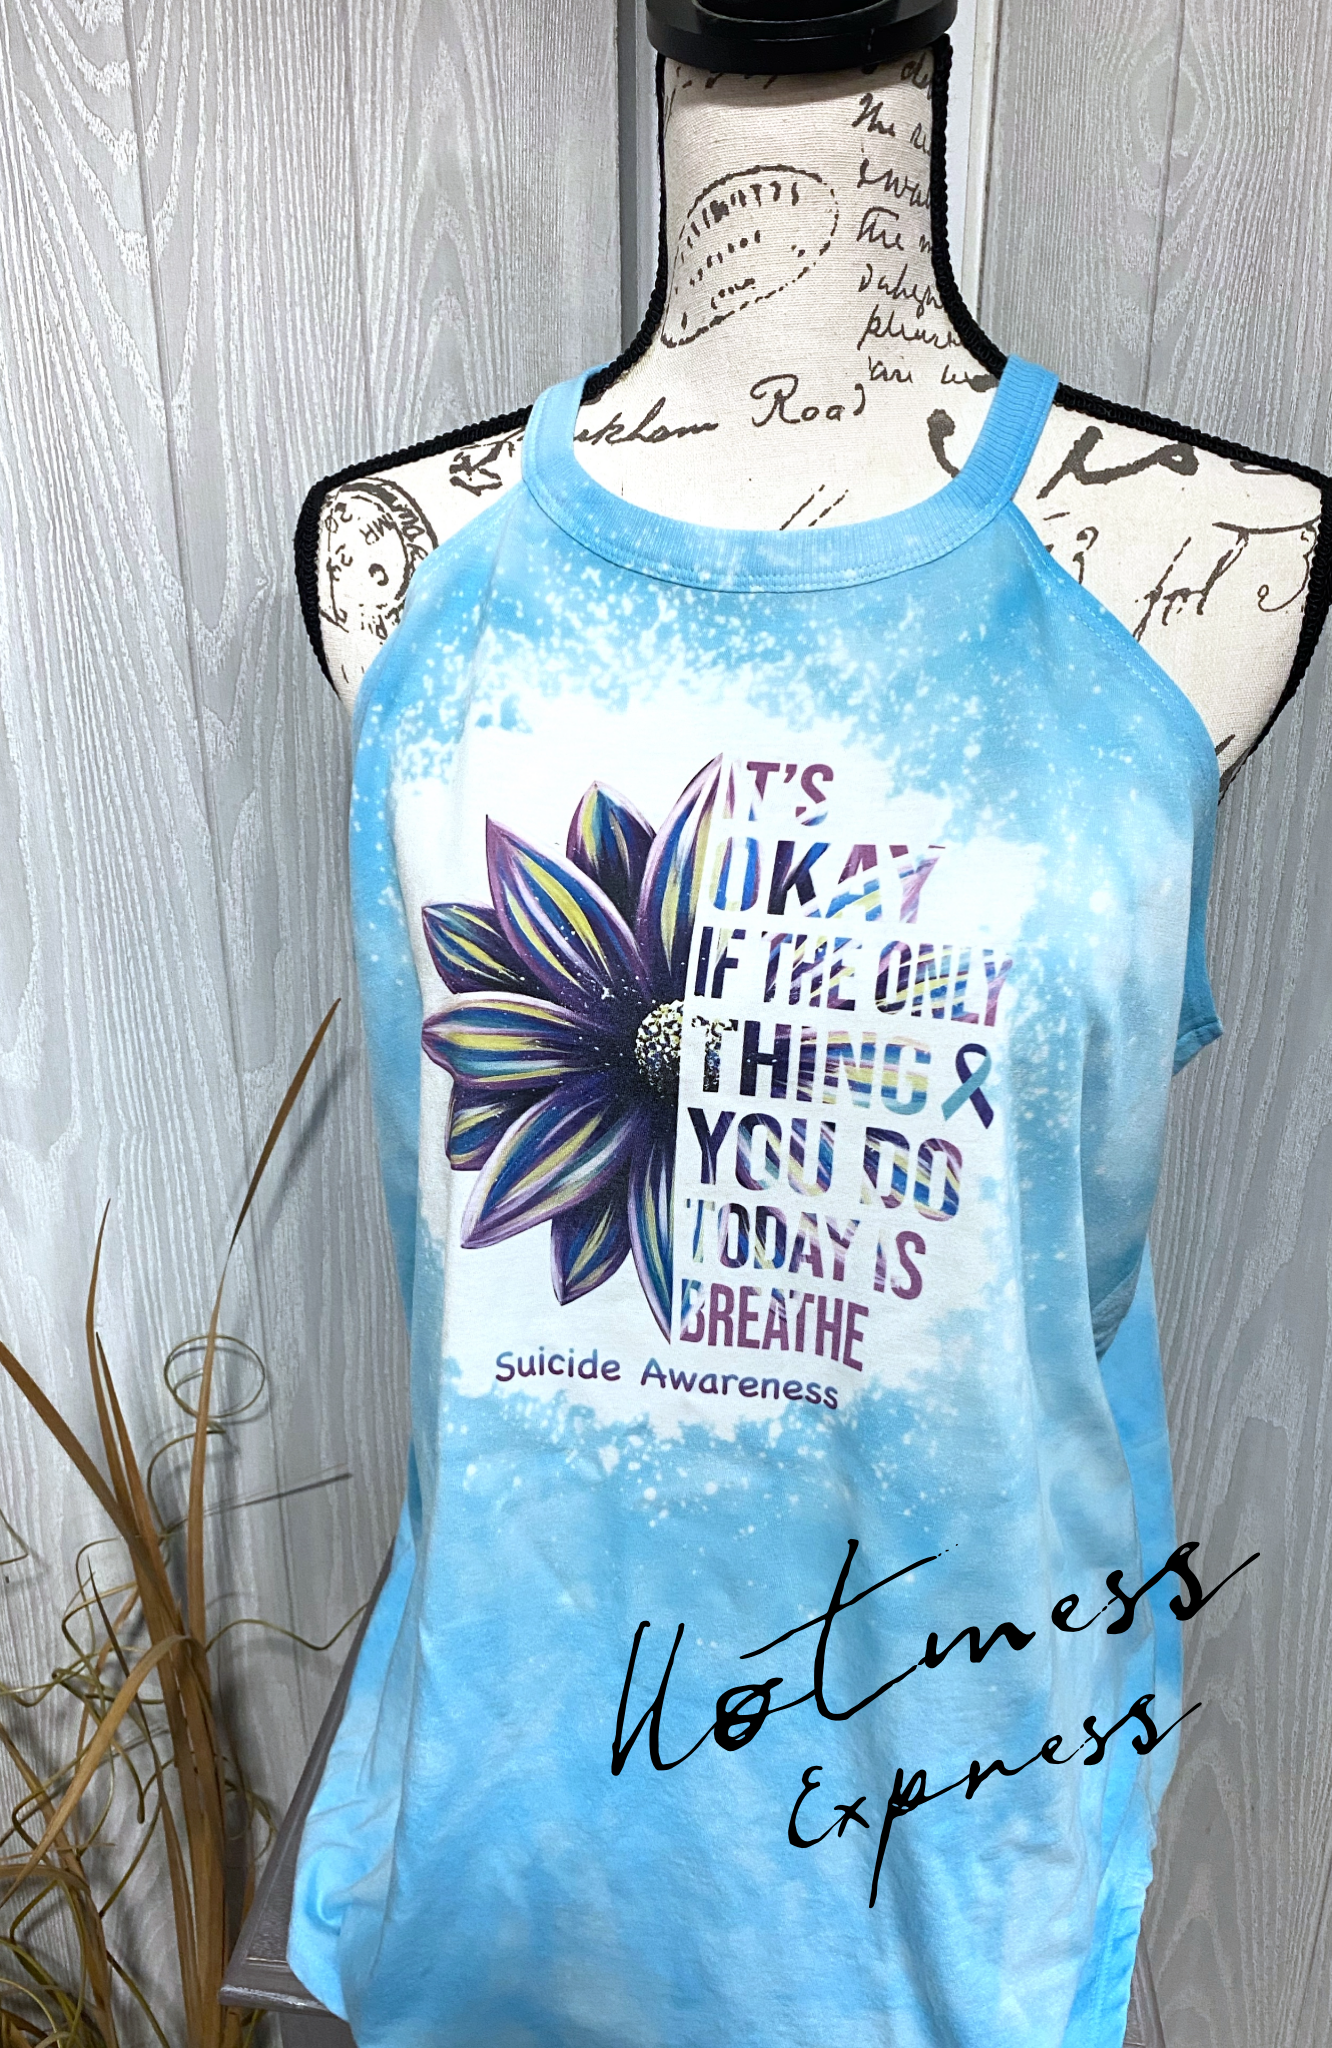 It’s okay if the Only Thing You Did Today Was Breathe Suicide awareness Graphic Rocker Tank